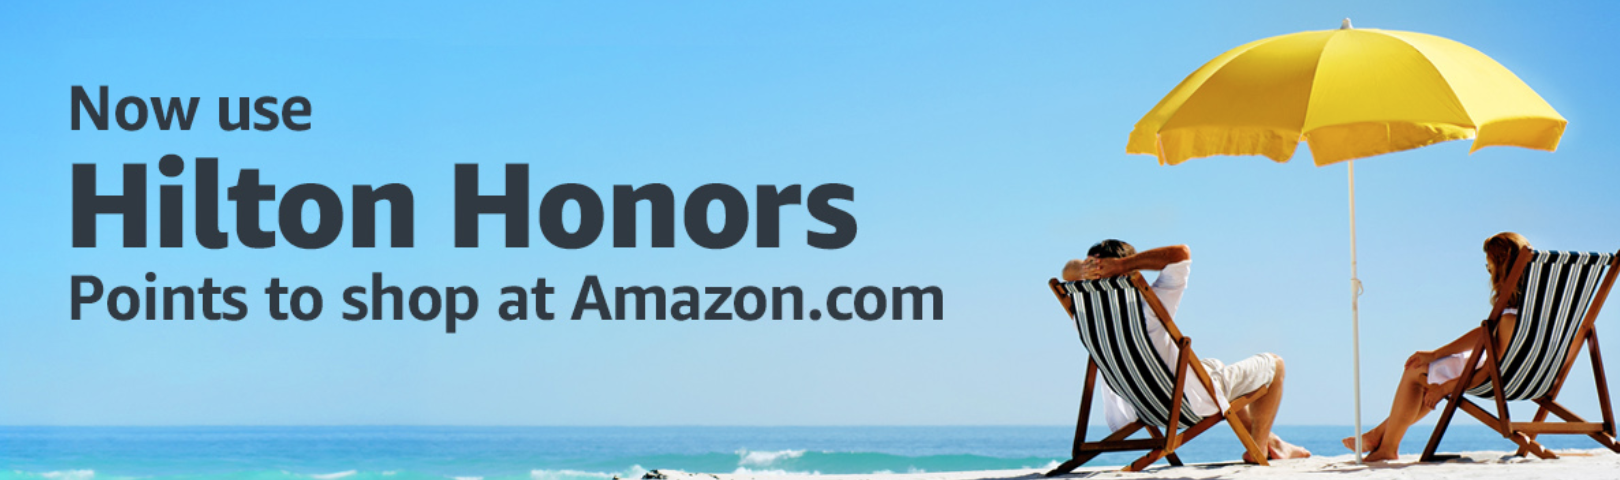 Shop At Amazon With Your Hilton Honors Points!